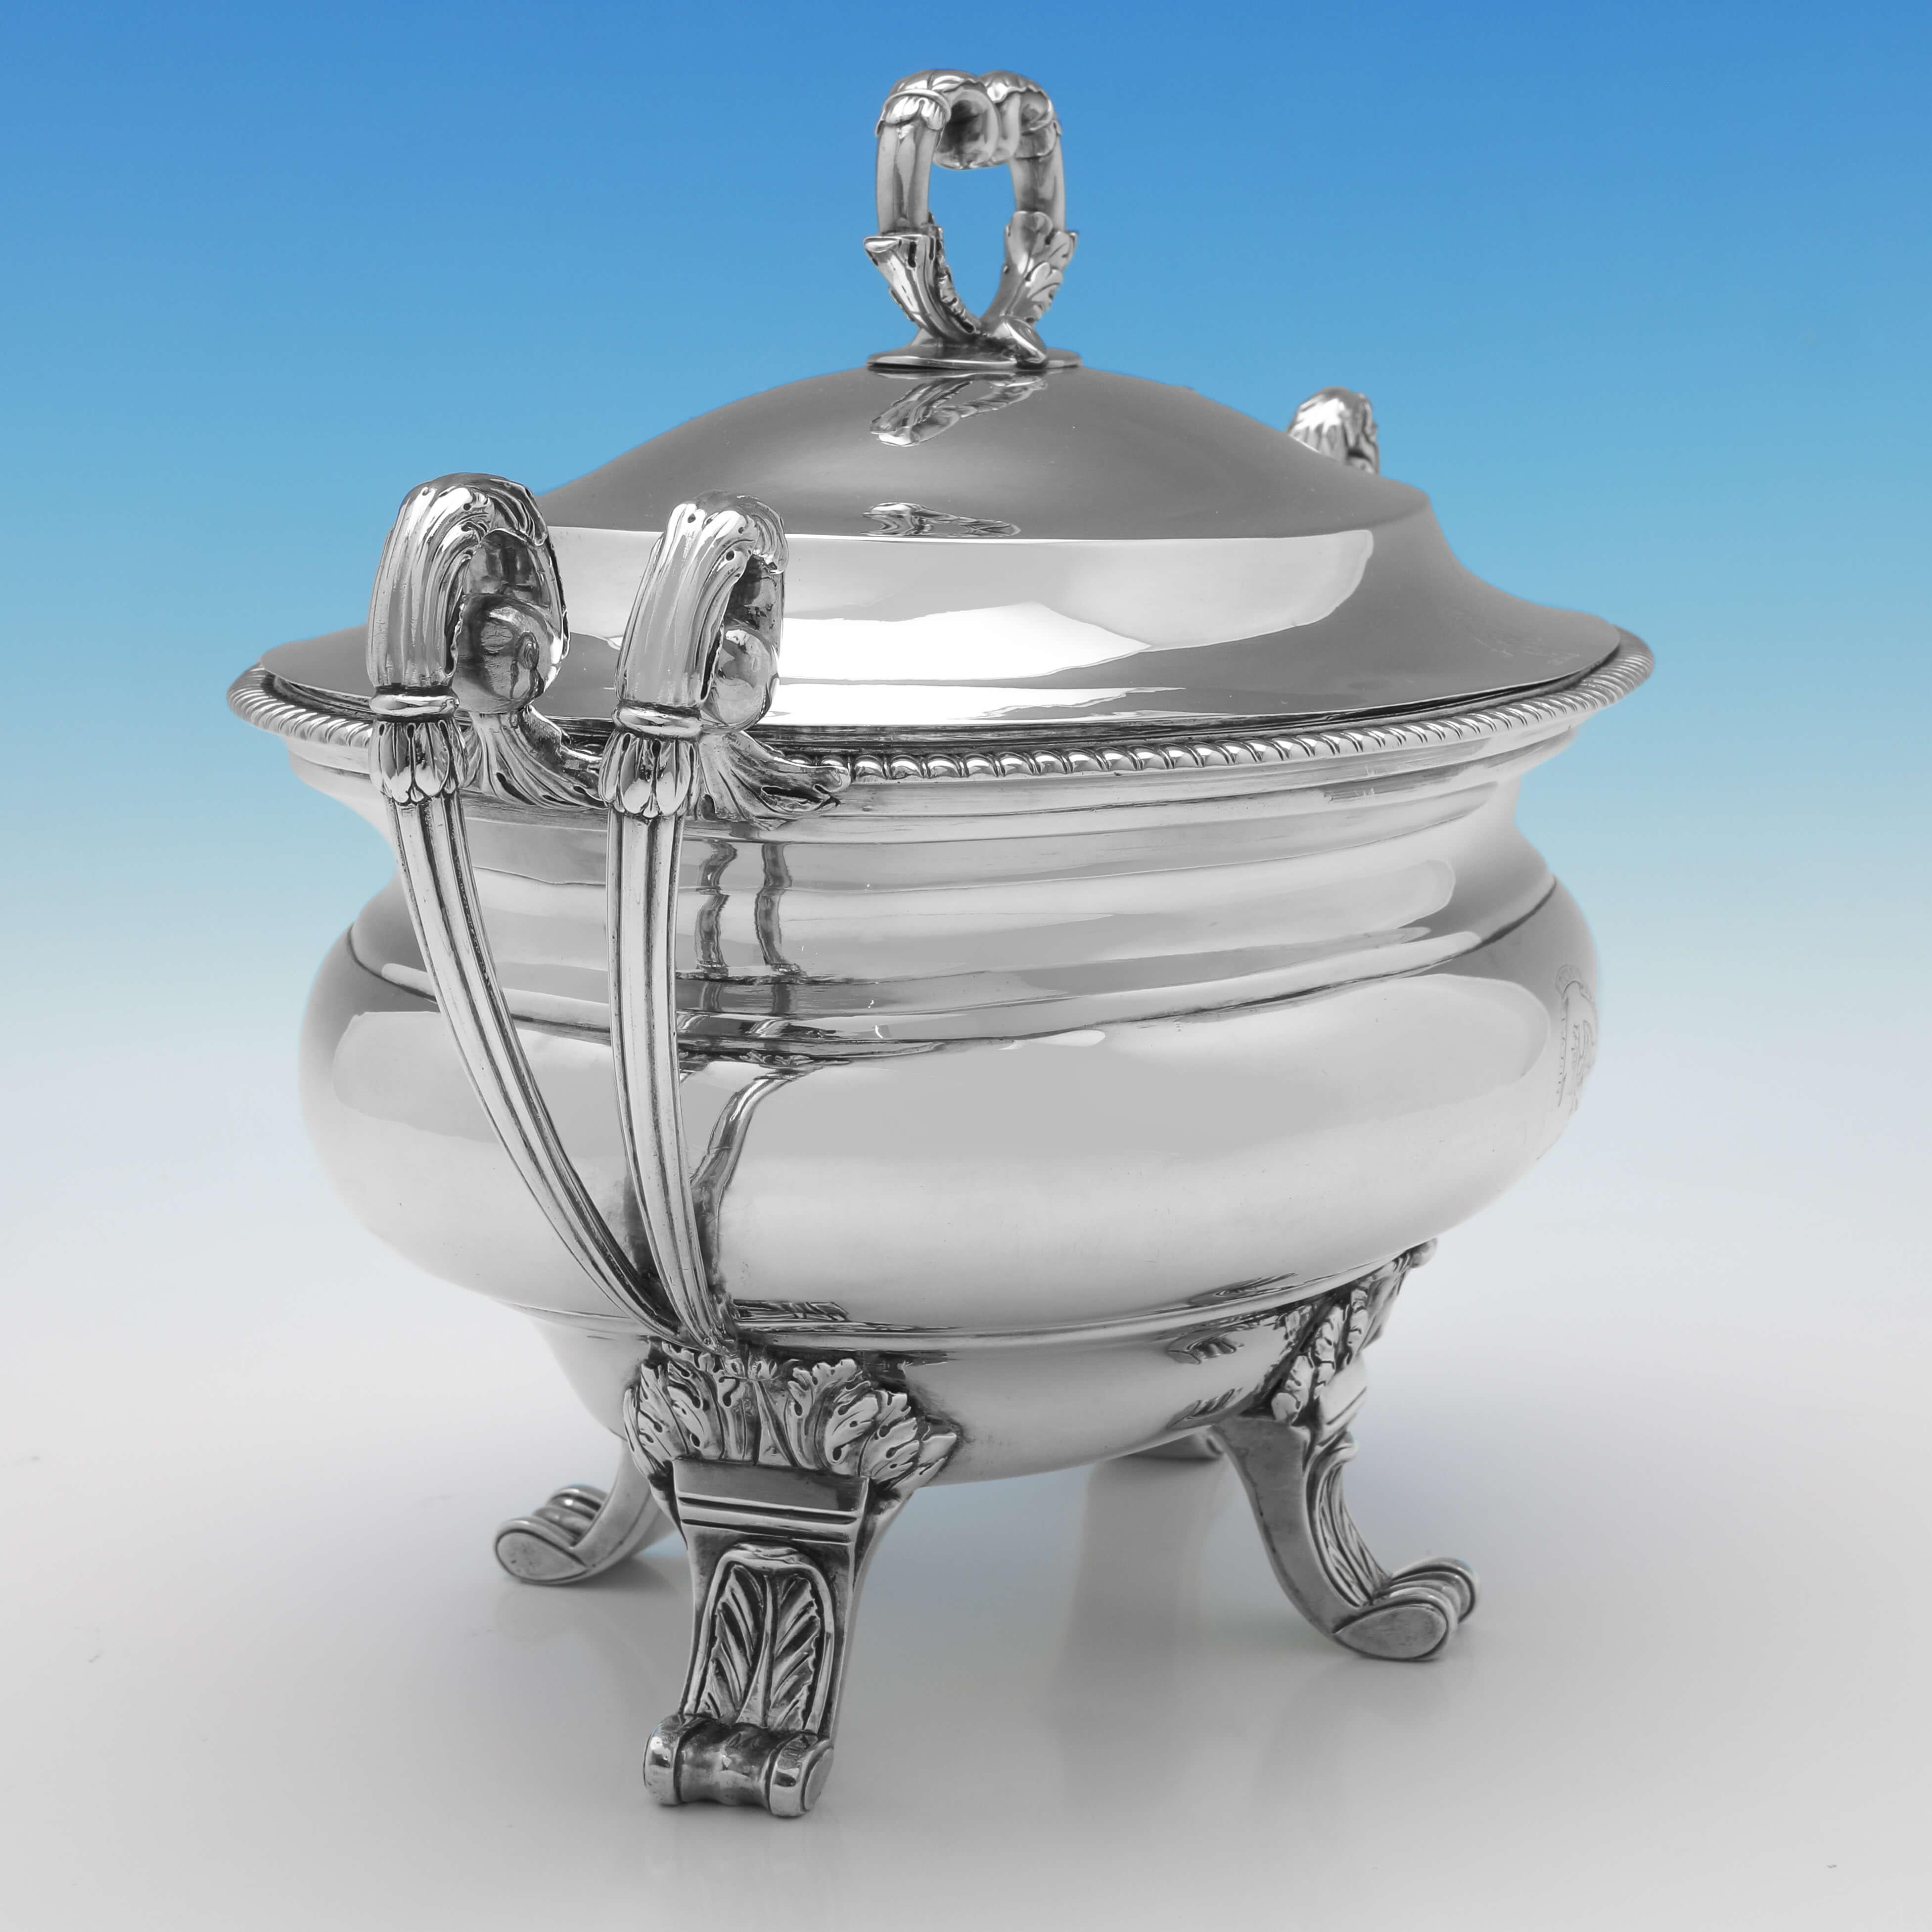 Hallmarked in London in 1799 by William Pitts, this stylish, George III, Antique Sterling Silver Soup Tureen, features unusual double scroll handles, four acanthus detailed feet, an engraved crest and motto, and a gadroon border. 

The soup tureen